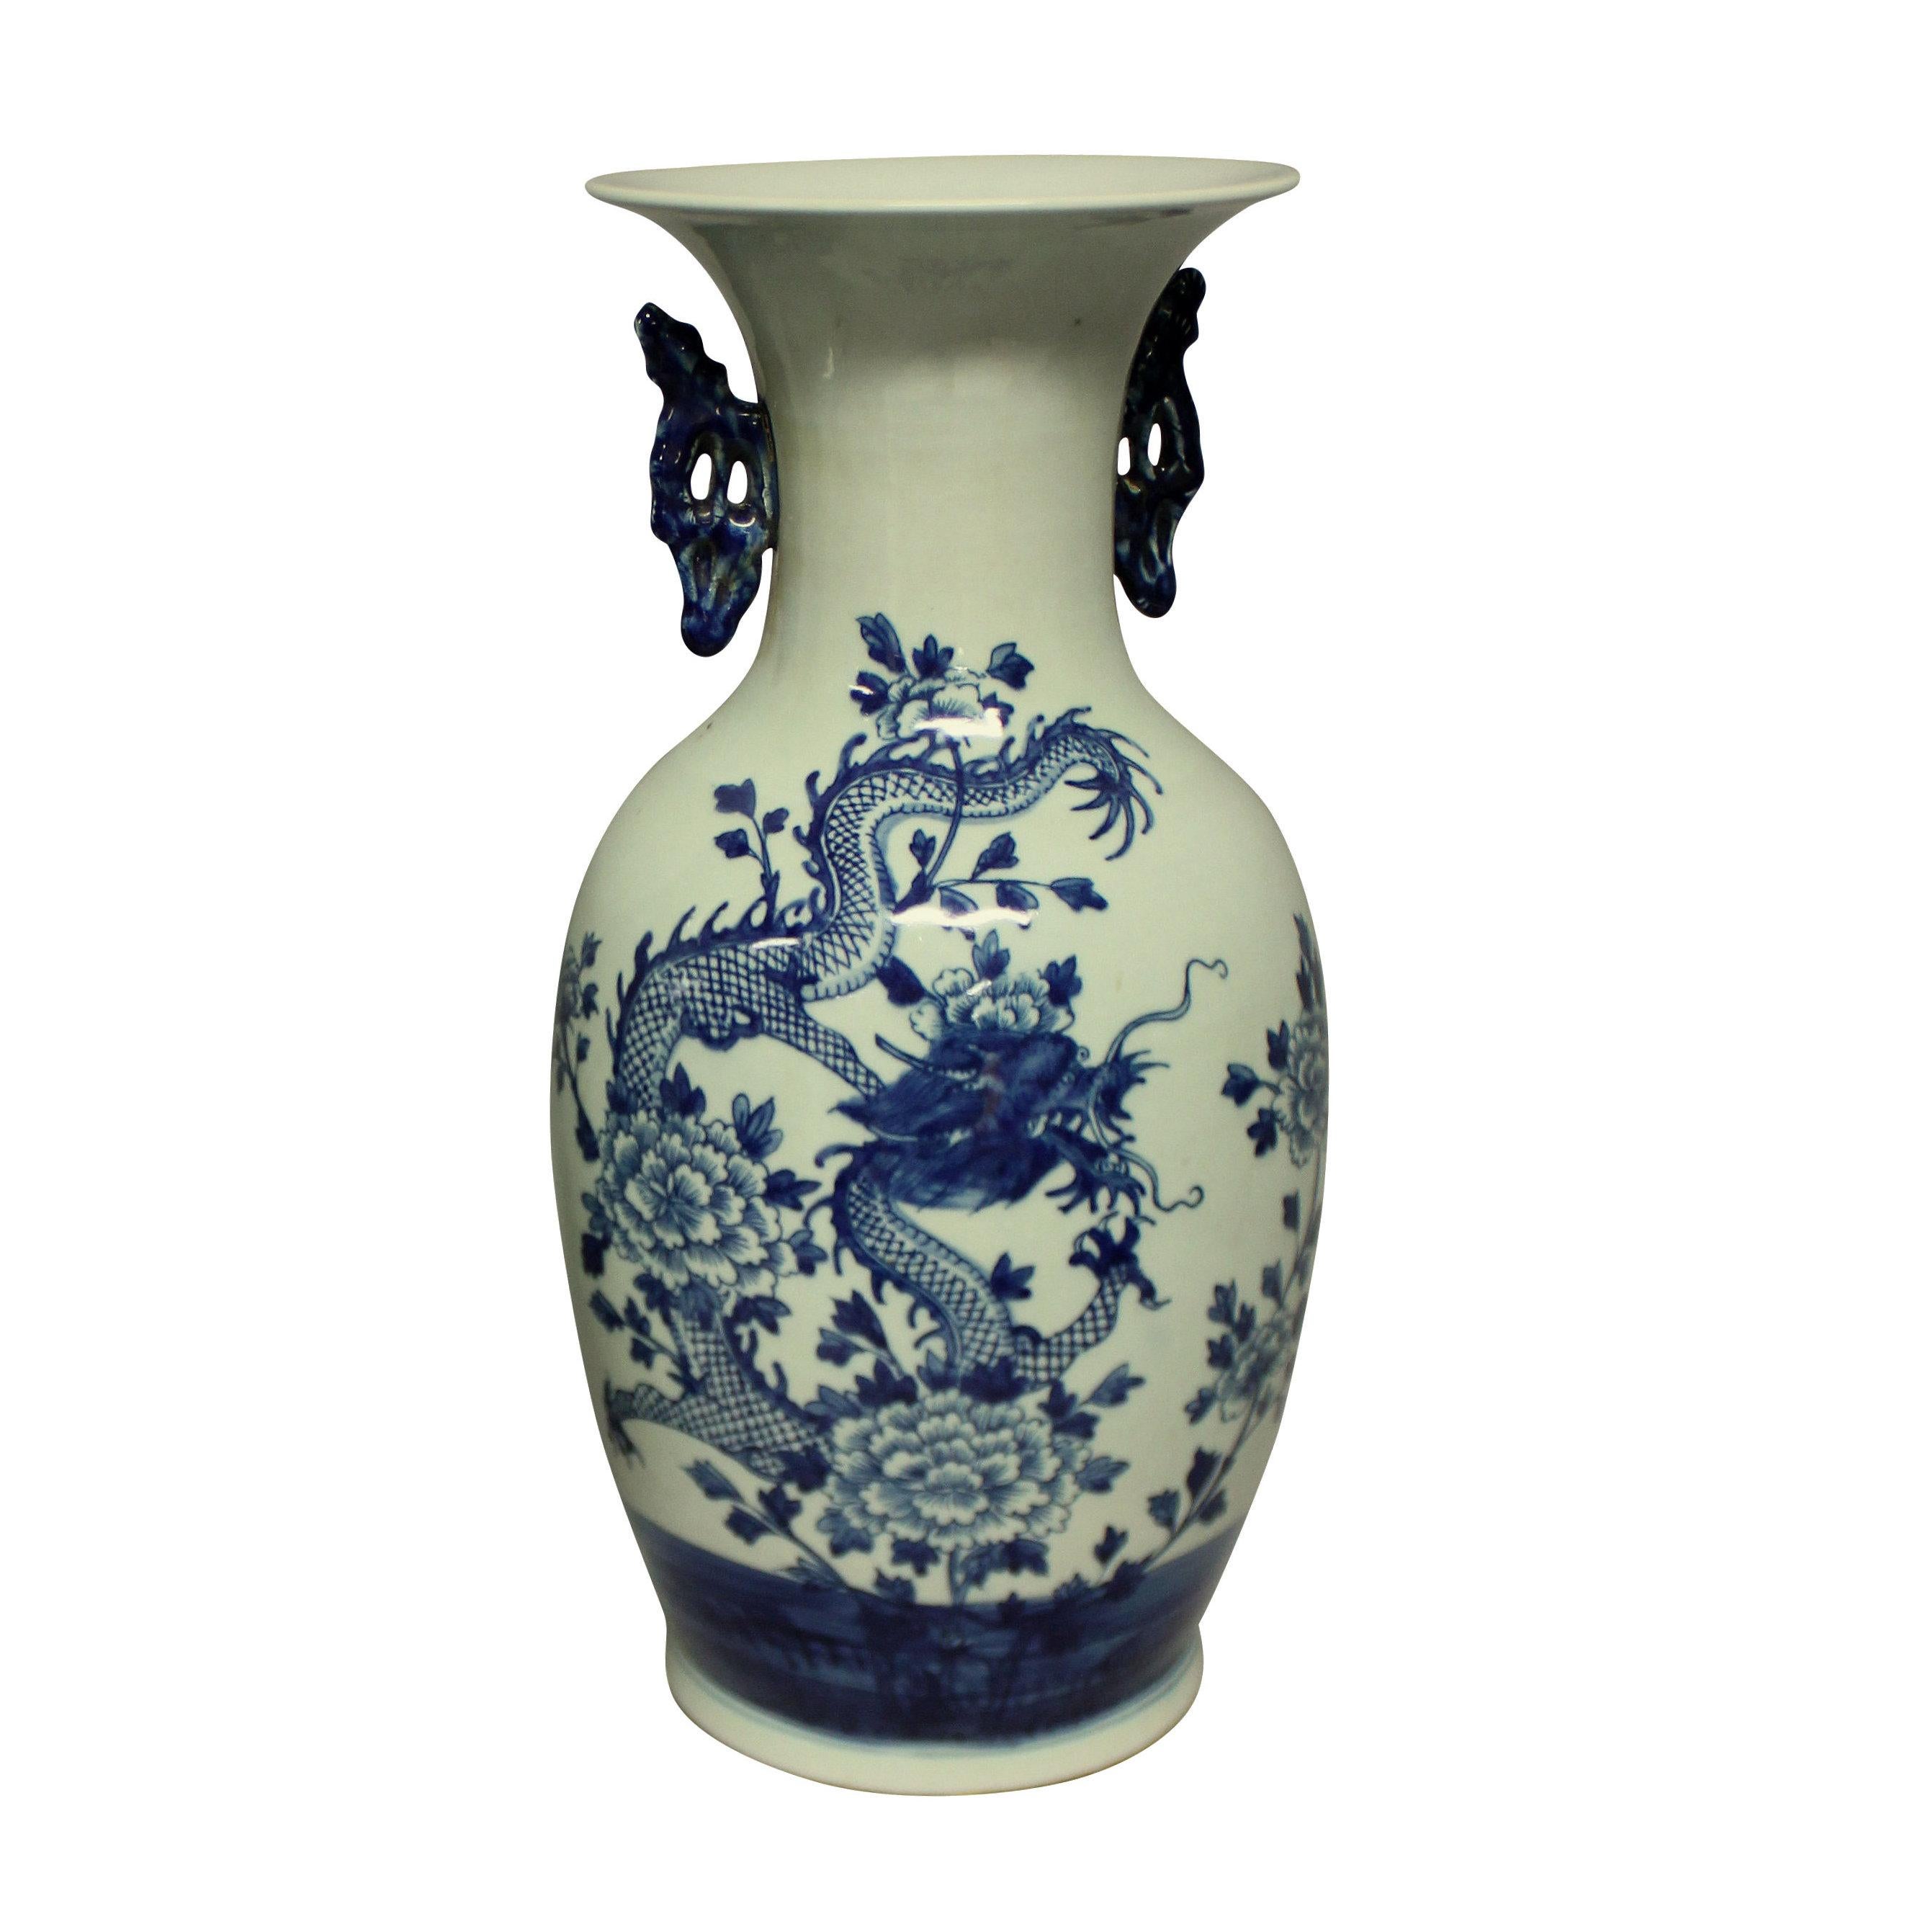 A pair of Chinese blue and white twin handled vases depicting dragons. The background color is a pale duck egg.